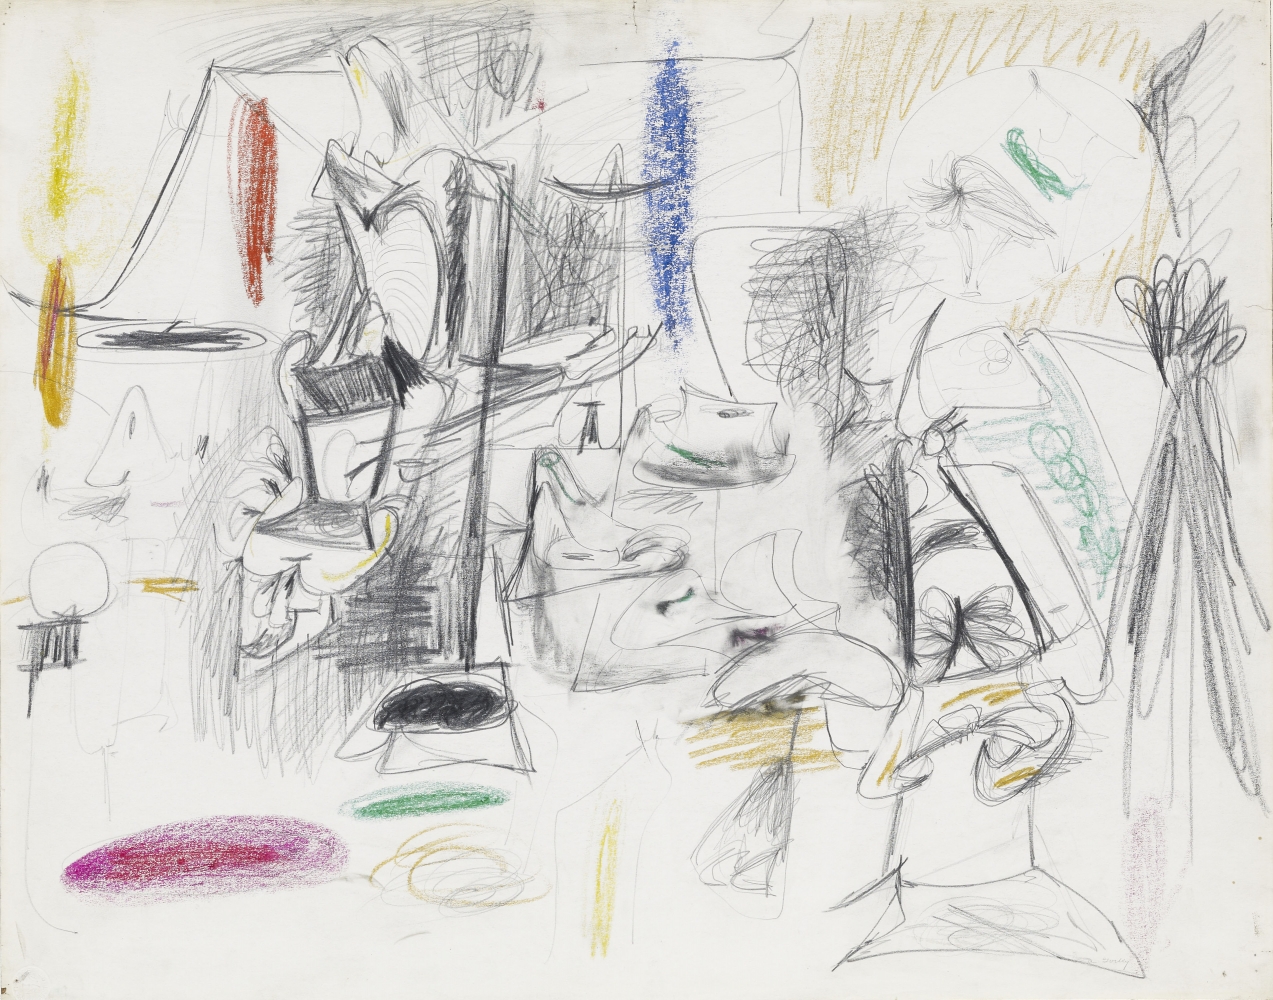 Drawing,&nbsp;Agony, c. 1946&ndash;47, graphite pencil and crayon on paper, 22 1/2 x 28 1/2 in. (57.2 x 72.4 cm). Private collection. [AGCR: D1338]